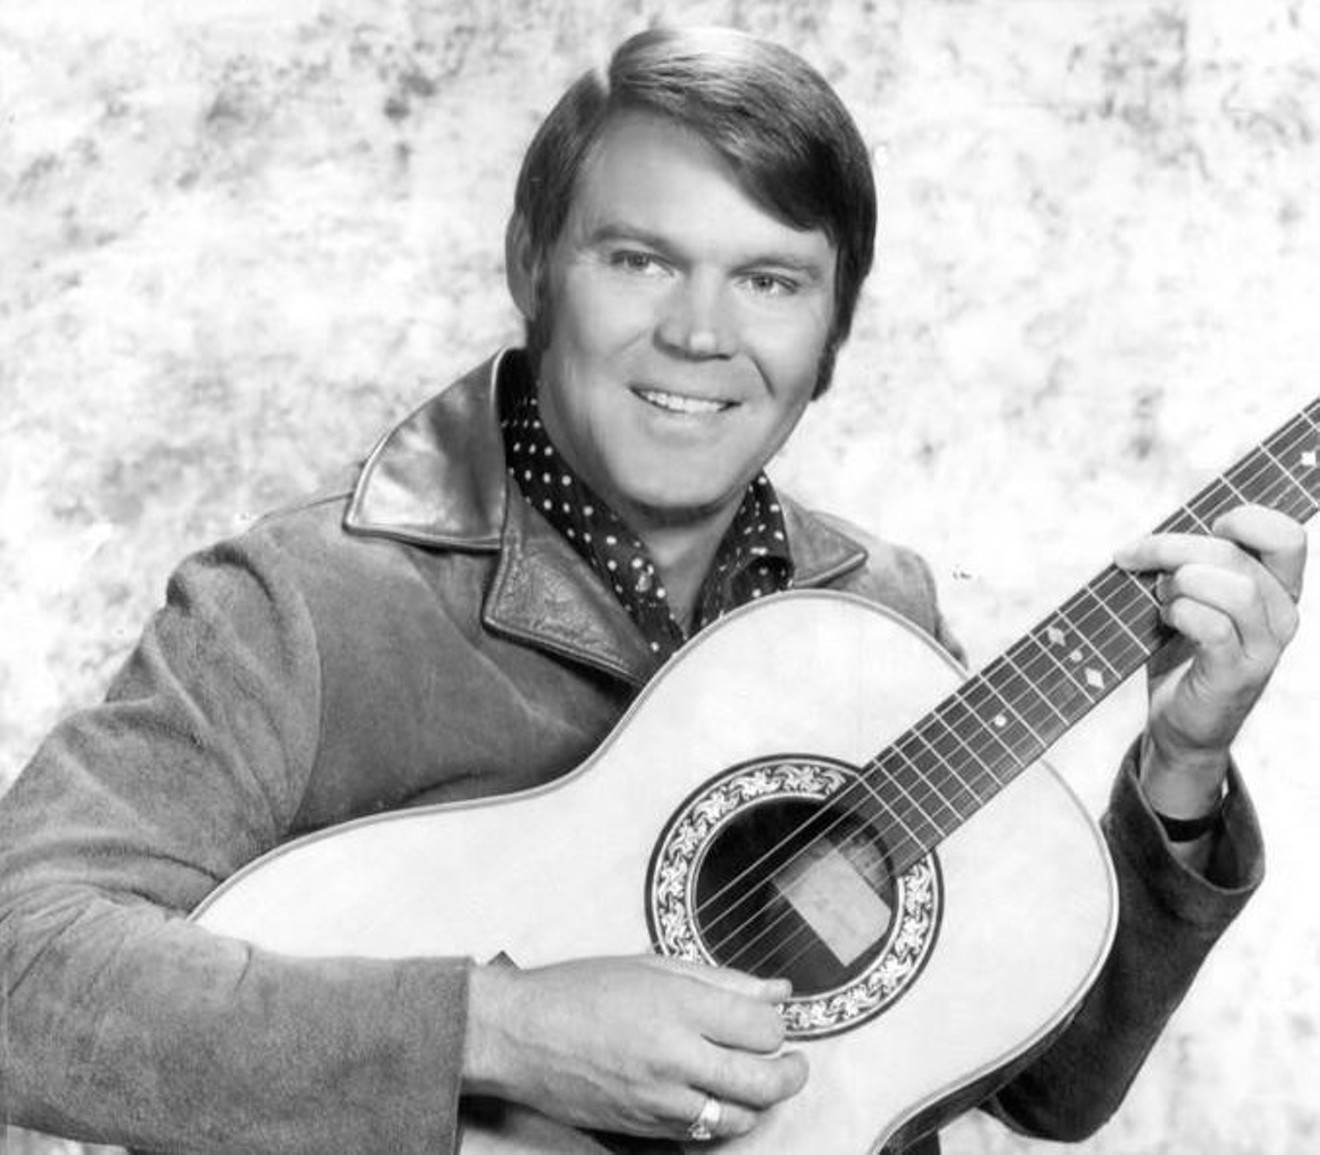 Glen Campbell died on August 8 in Nashville, Tennessee.